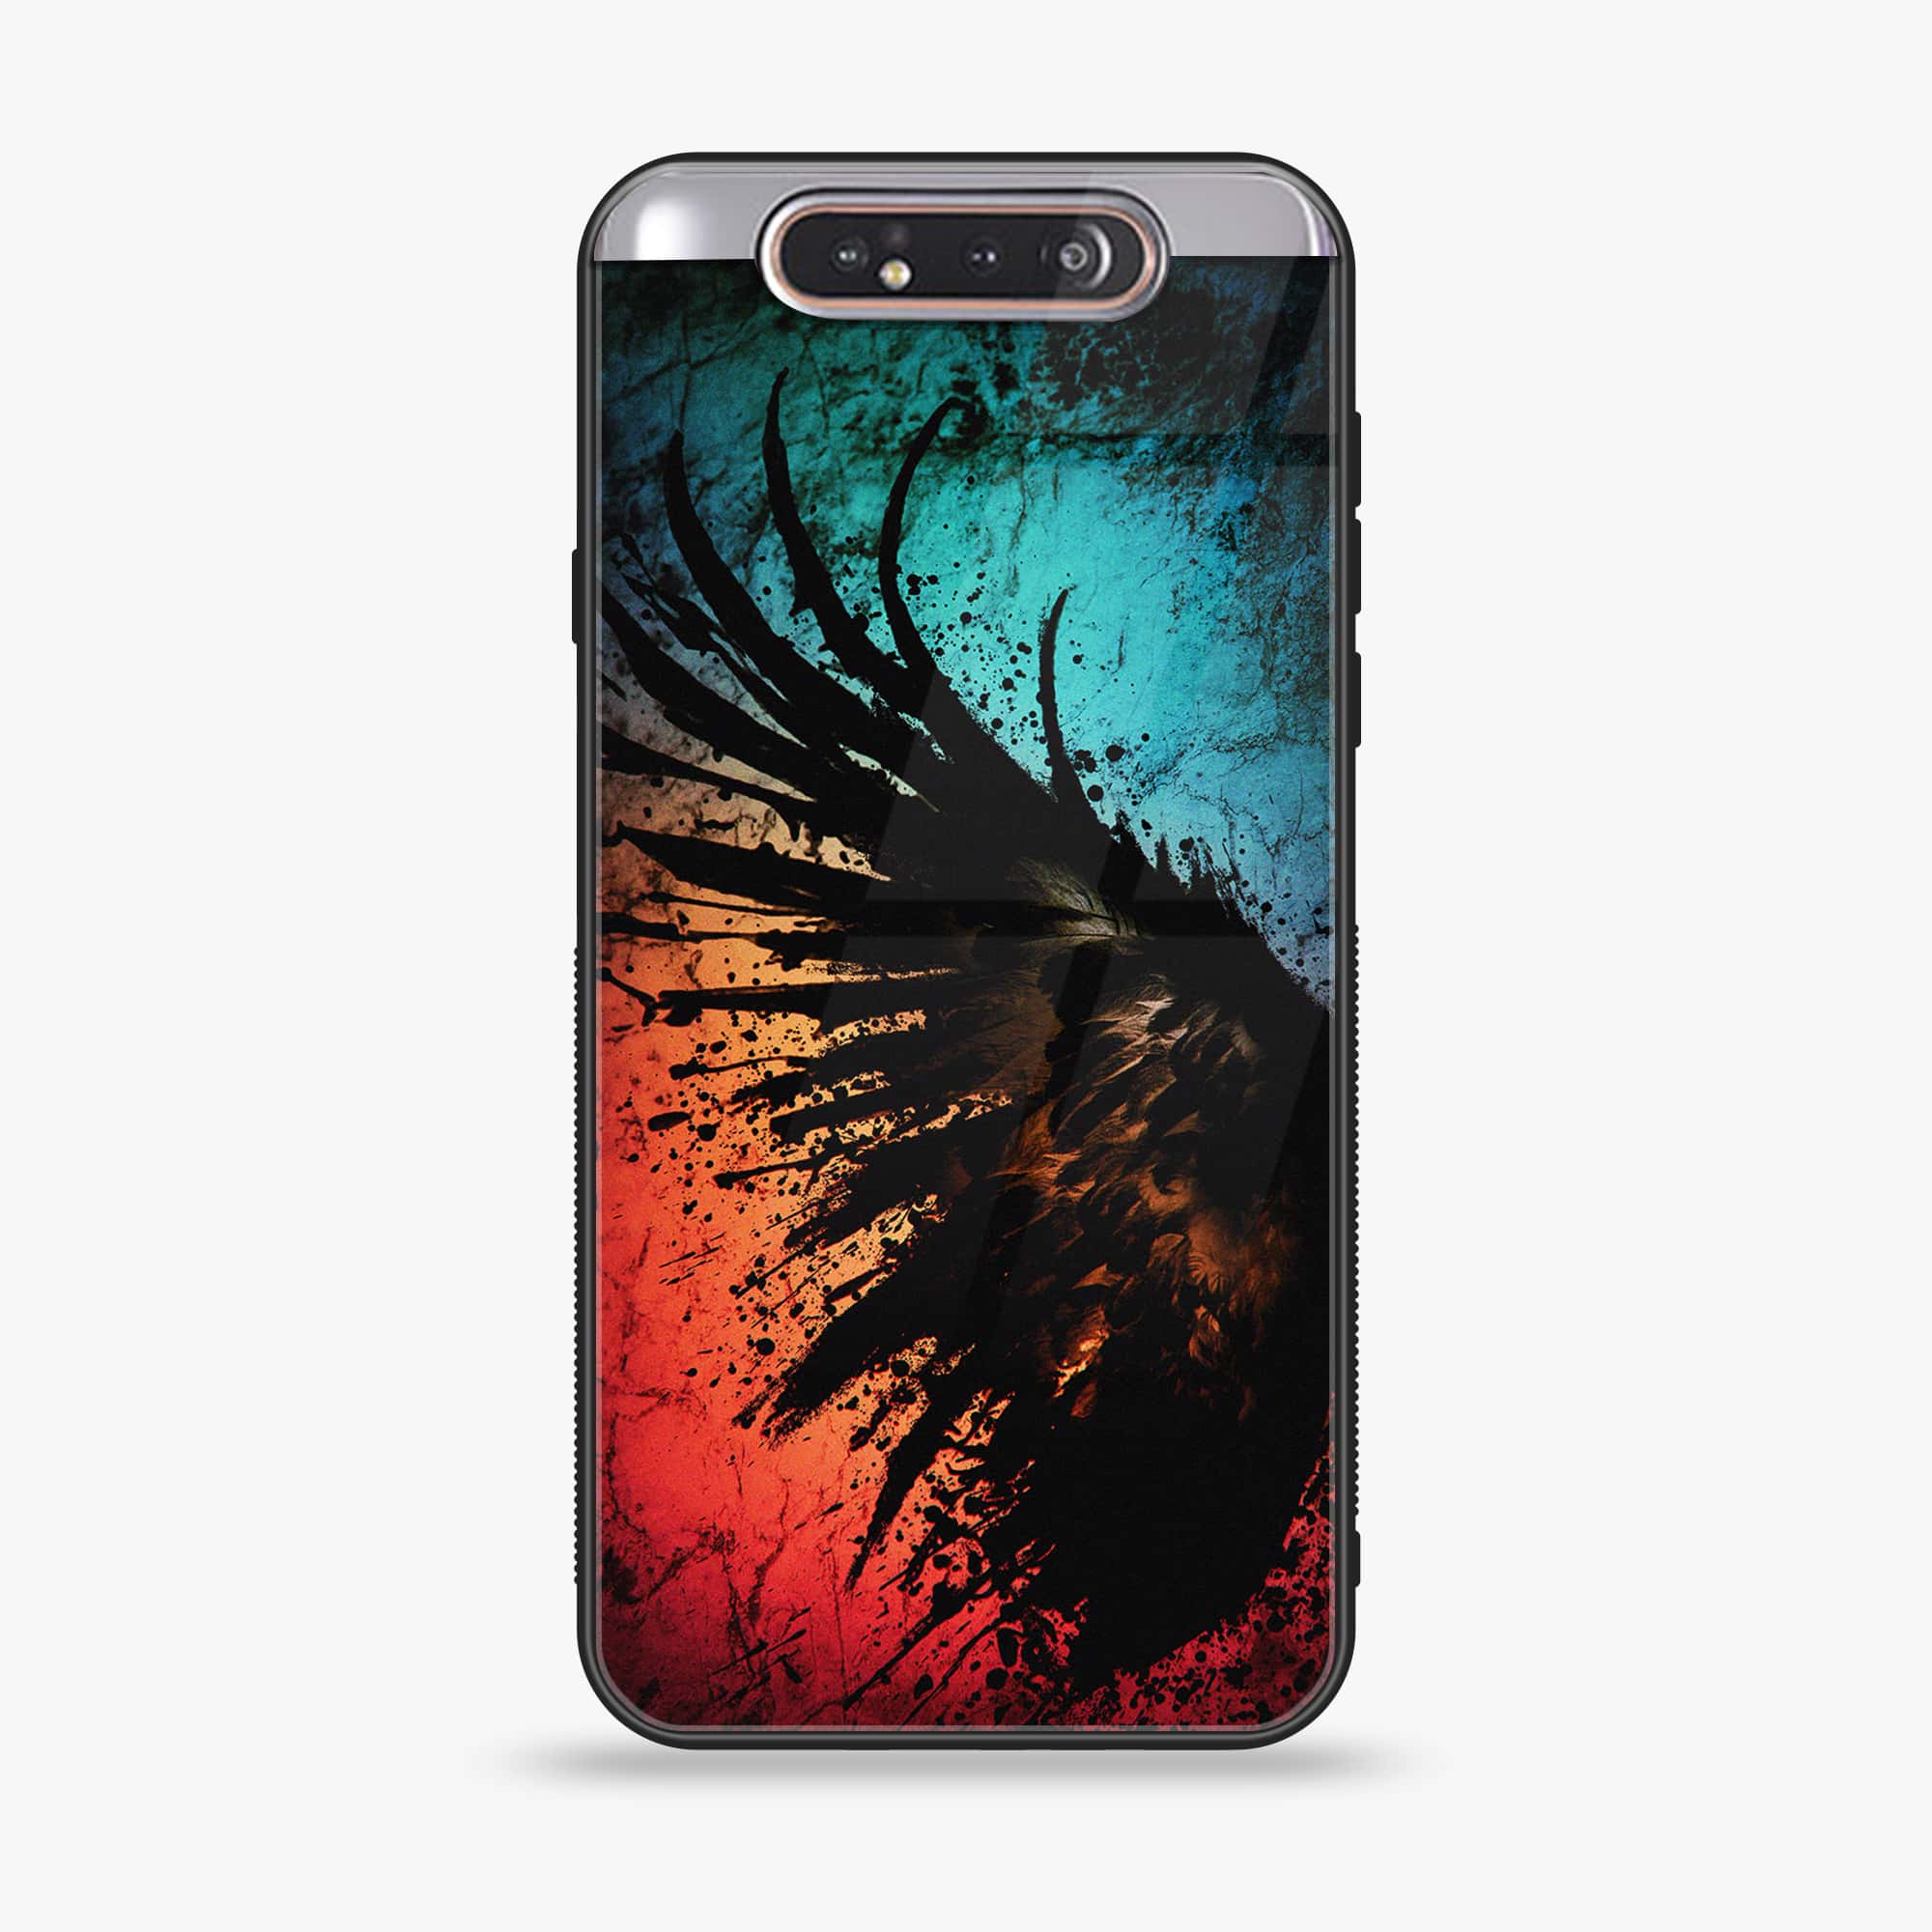 Samsung Galaxy A80 - Angel Wings 2.0 Series - Premium Printed Glass soft Bumper shock Proof Case